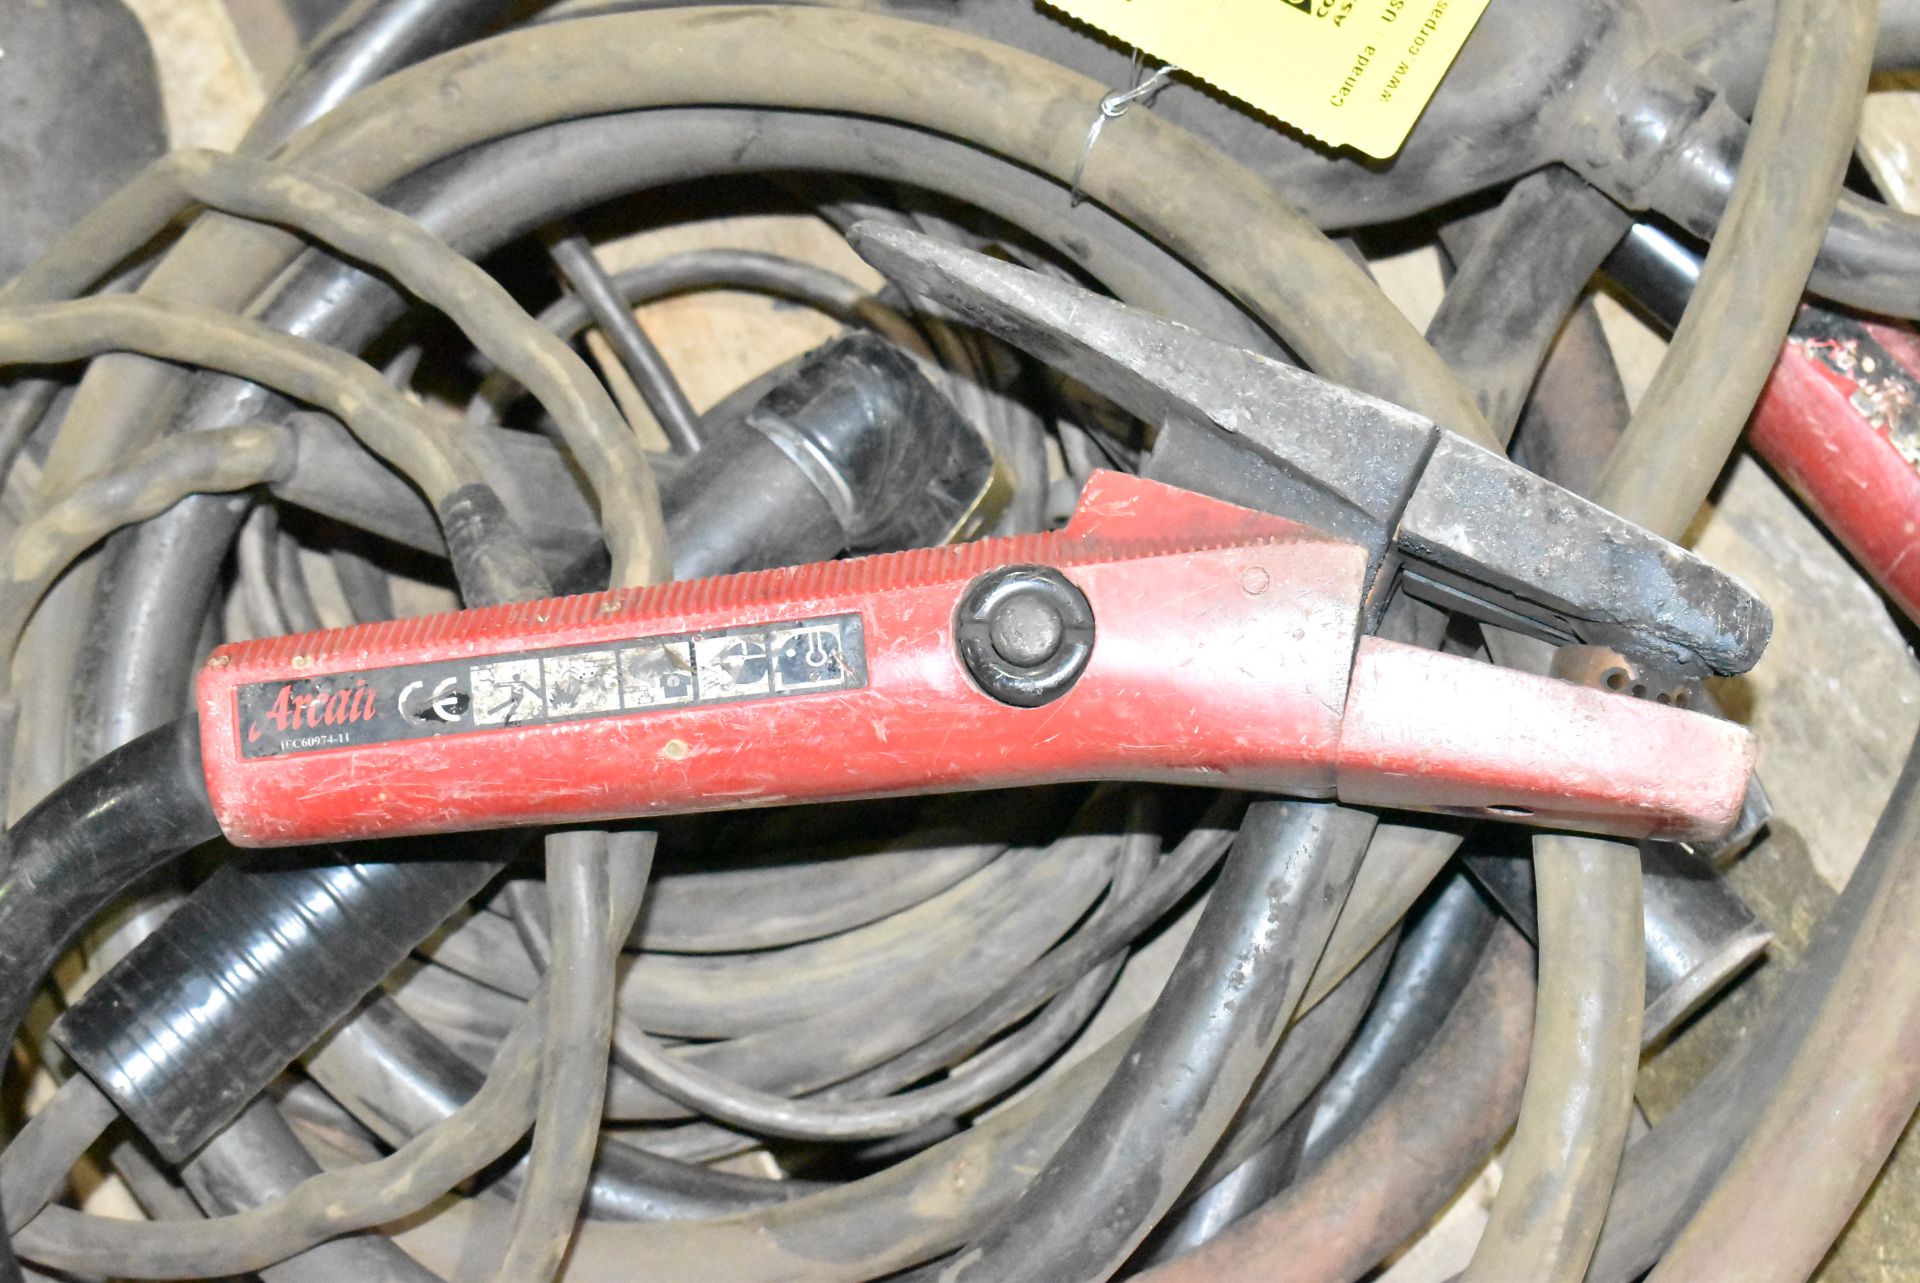 LOT/ ARCAIR GOUGING TORCHES & CABLES [RIGGING FEES FOR LOT #1189 - $30 USD PLUS APPLICABLE TAXES] - Image 3 of 3